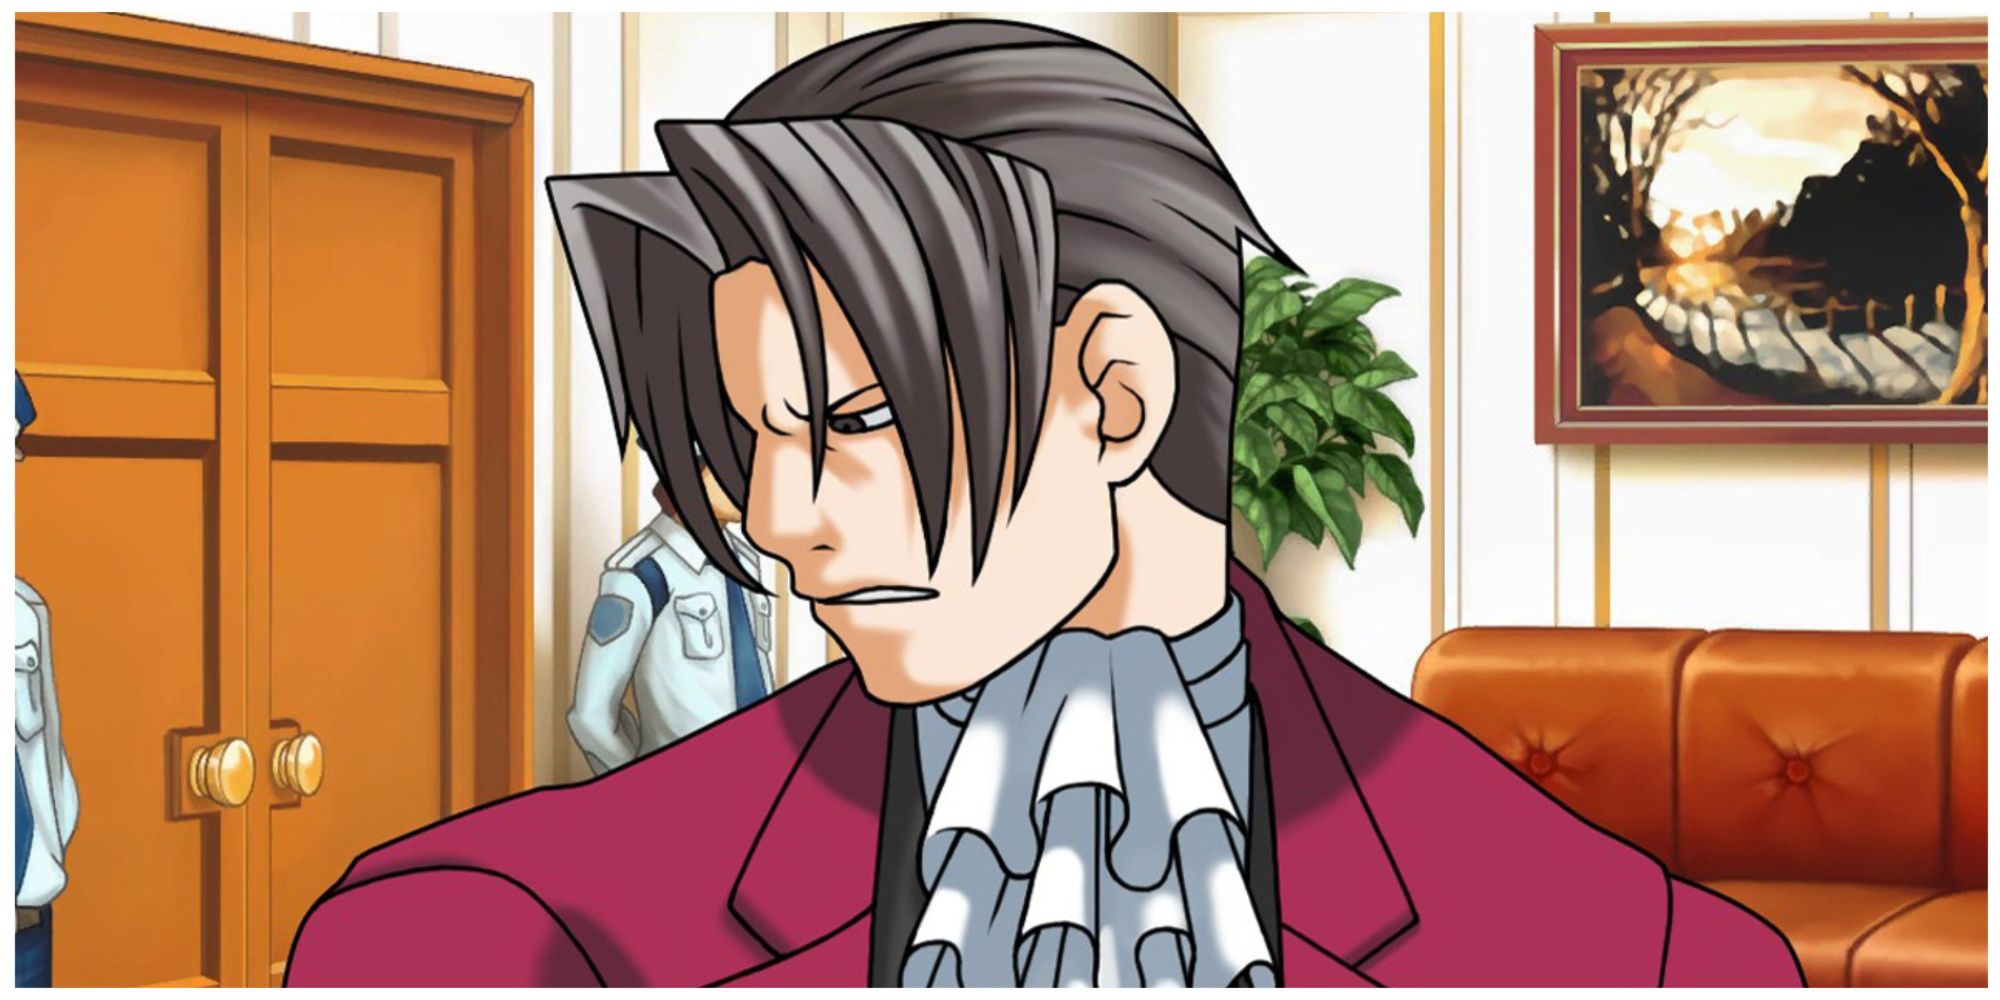 Miles Edgeworth frowning and looking to the side in a courtroom in Ace Attorney